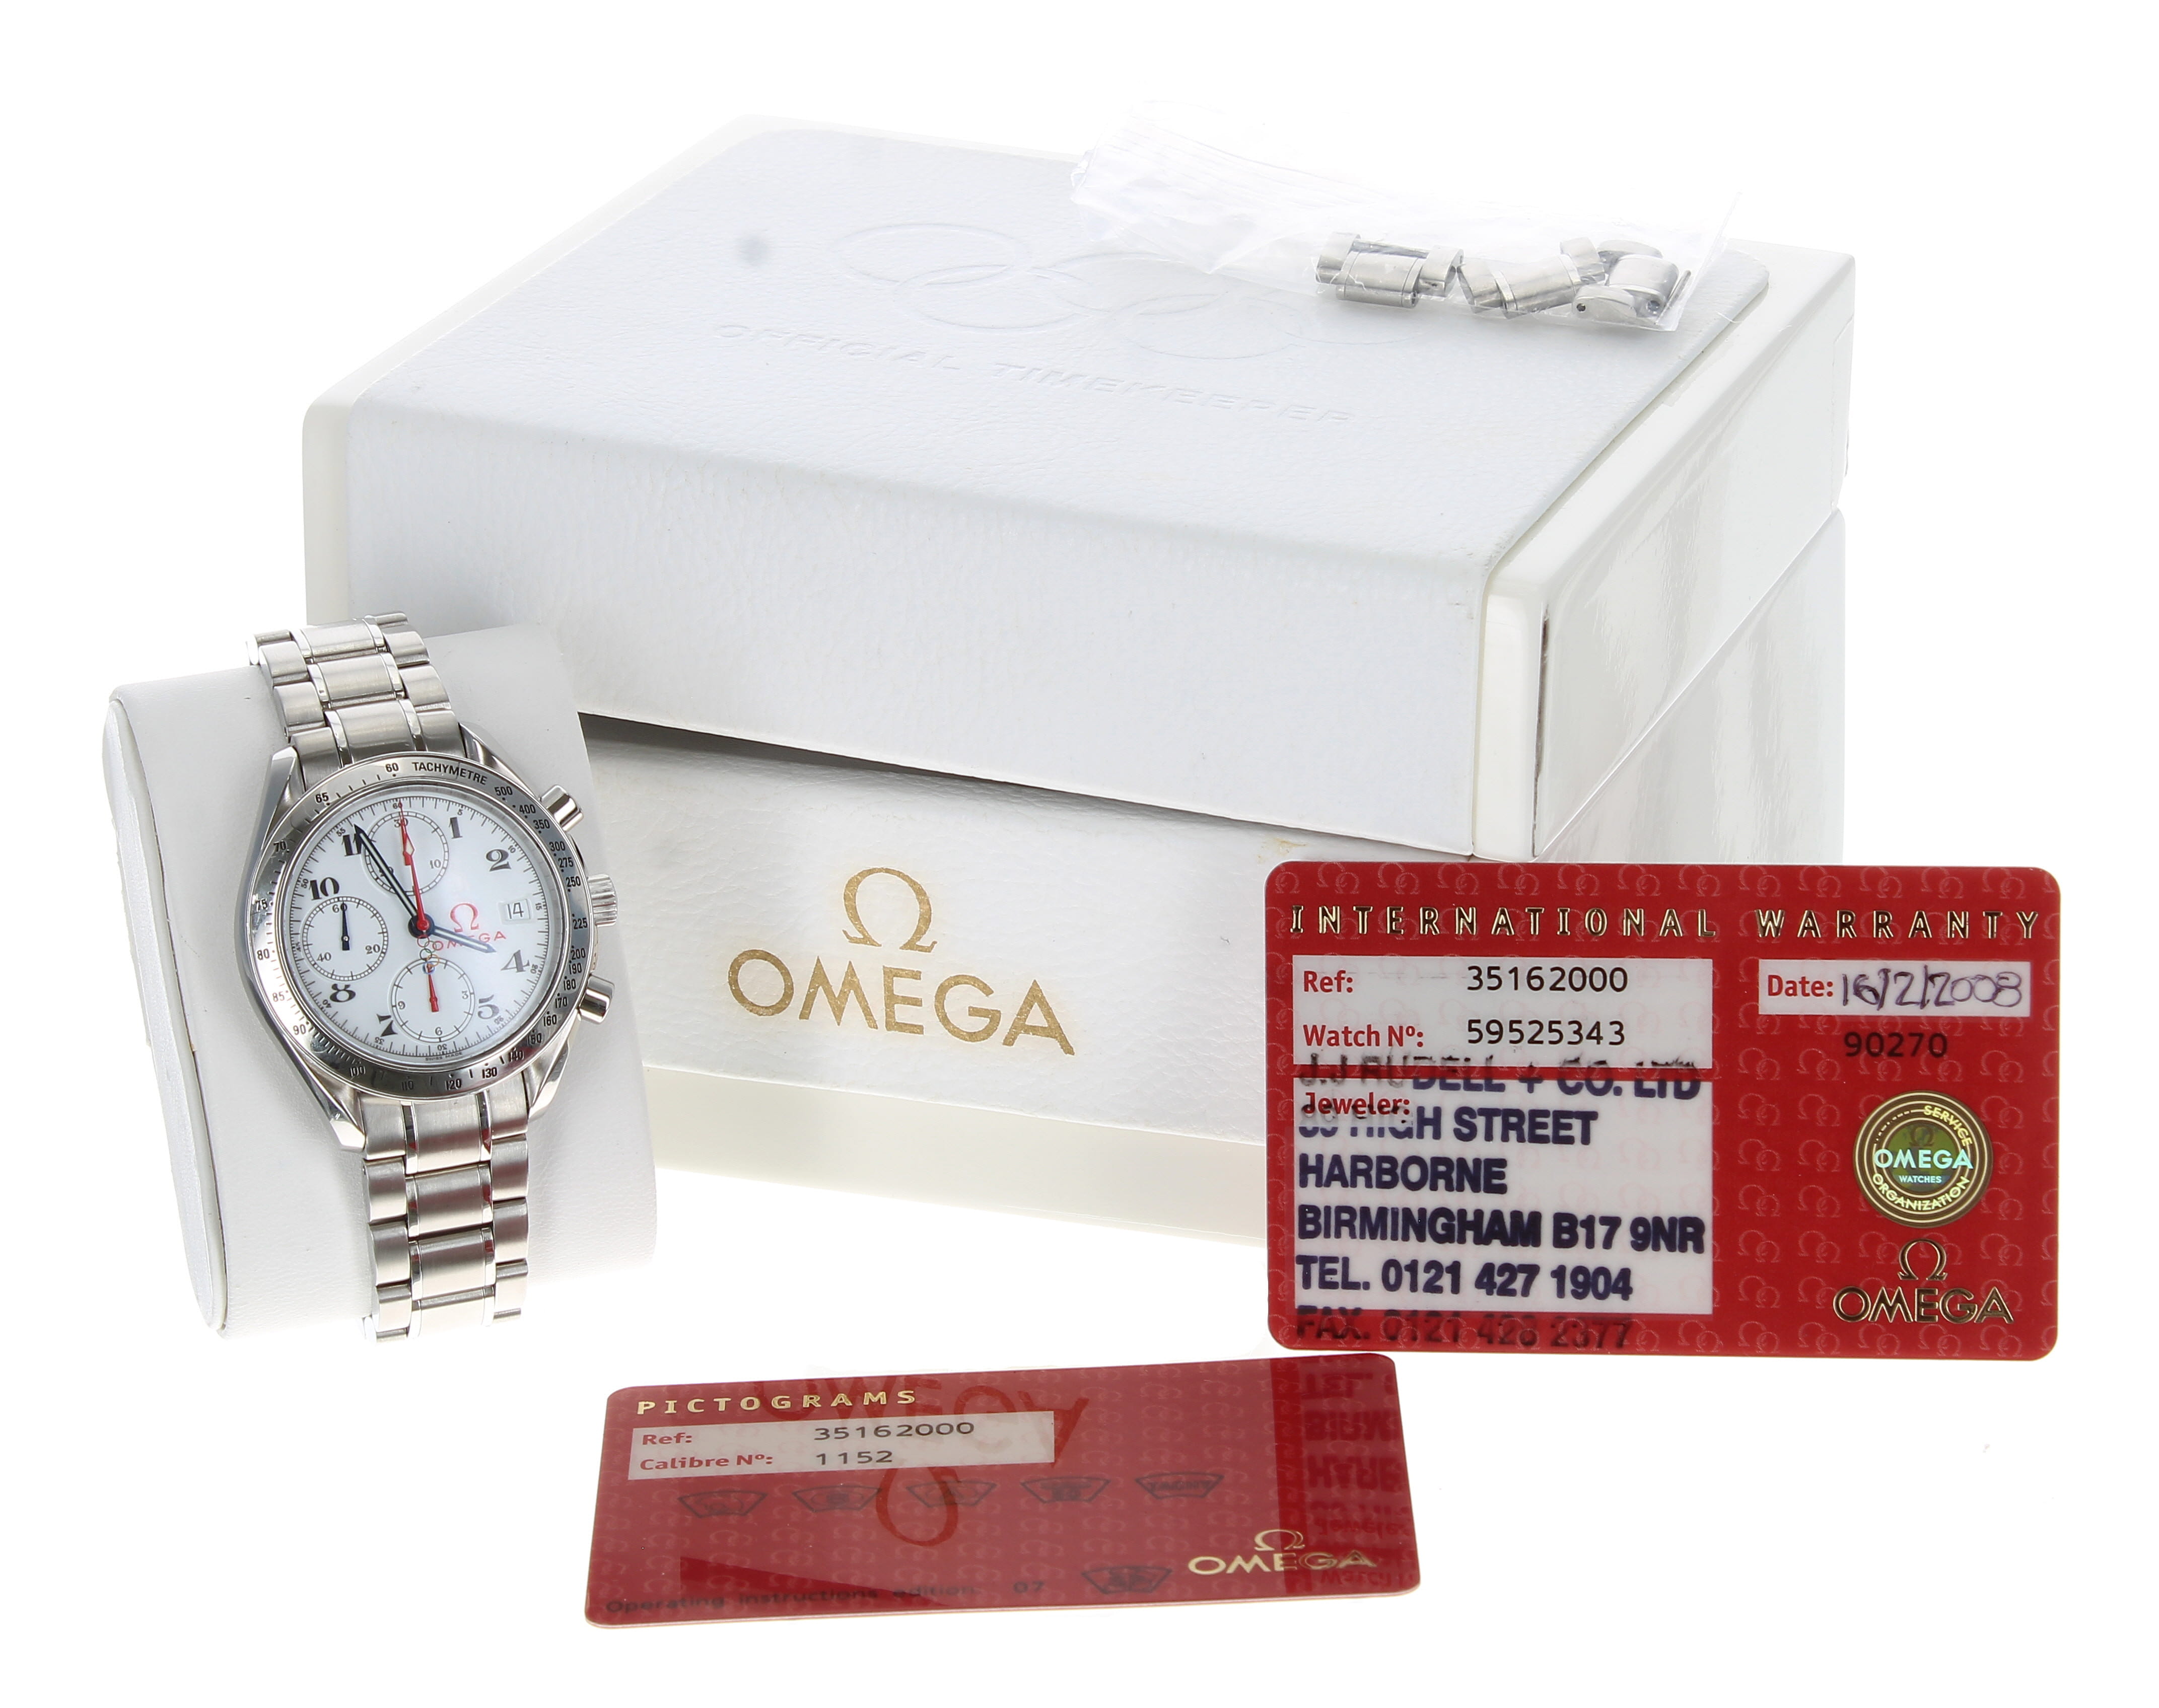 Omega Speedmaster Olympic Edition Chronograph automatic stainless steel gentleman's wristwatch, - Image 3 of 5